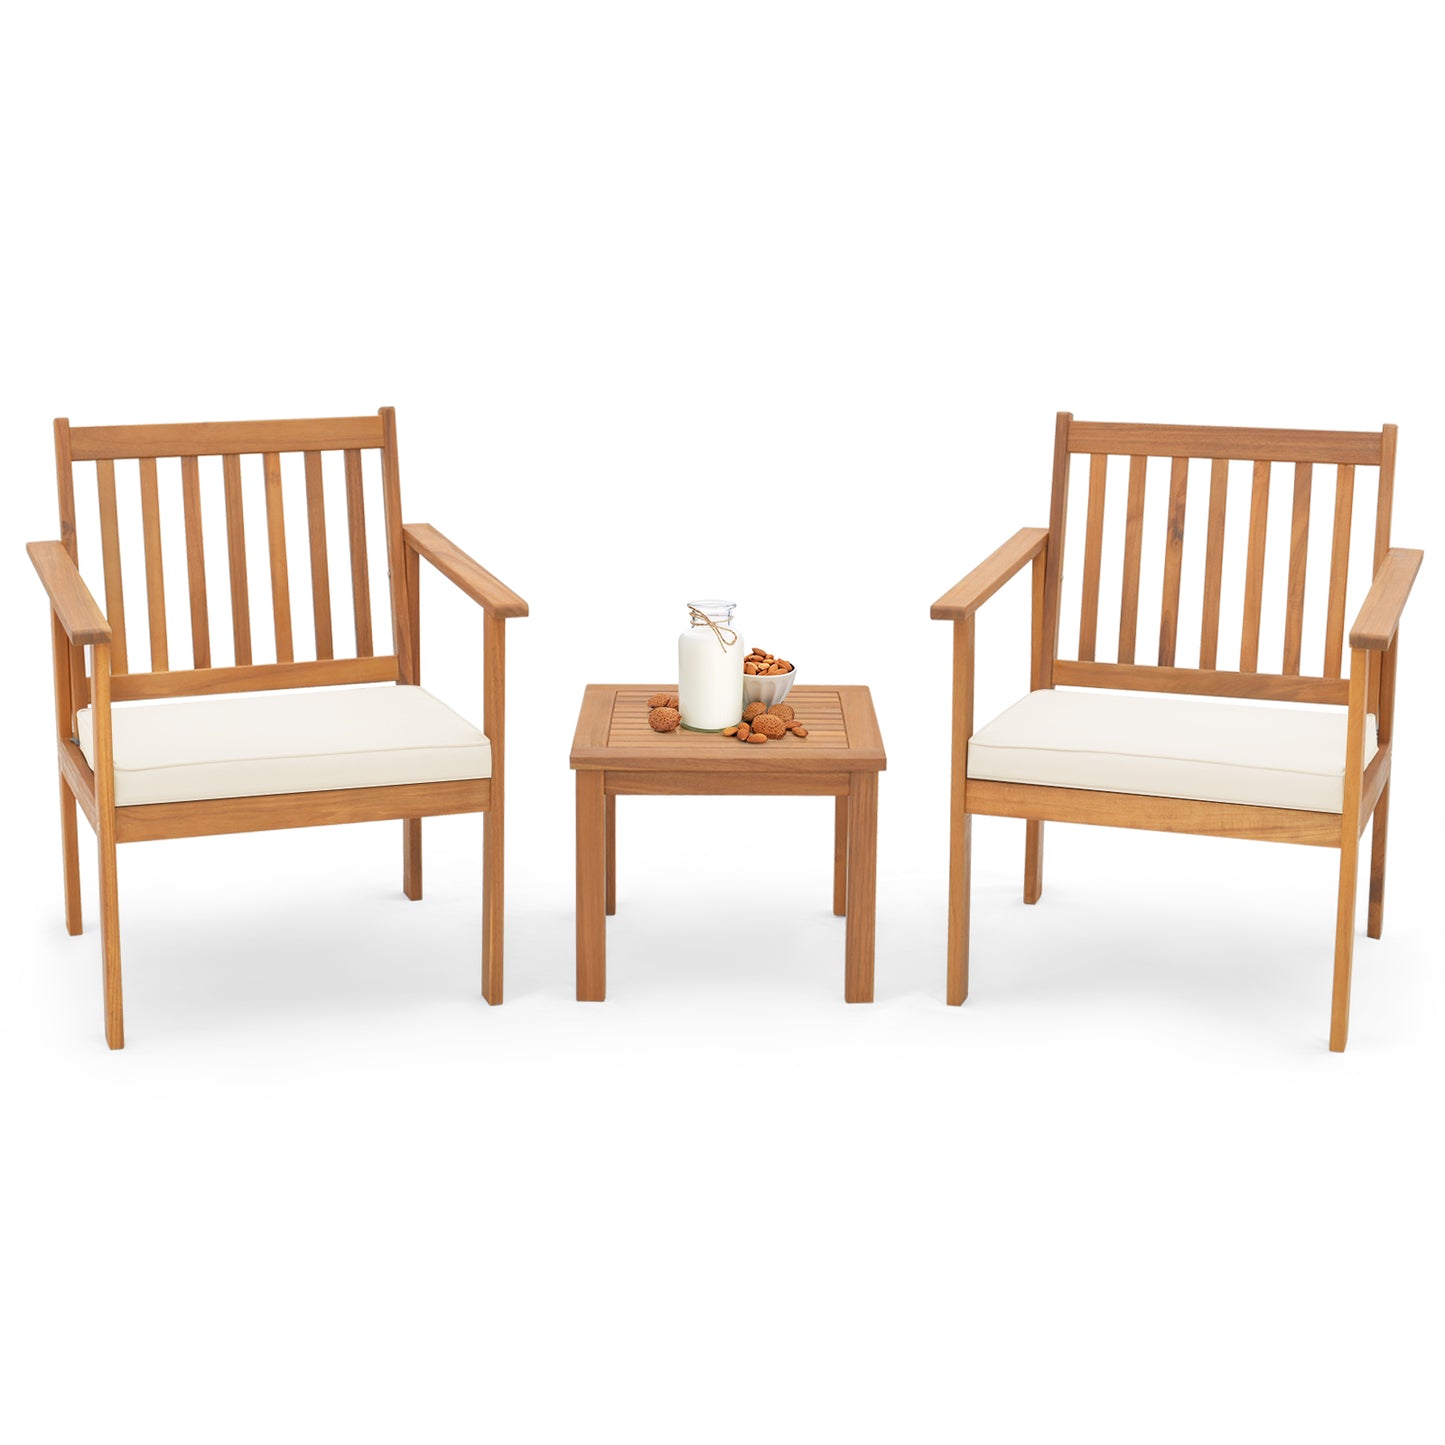 3 Pieces Patio Wood Furniture Set with soft Cushions for Porch-White